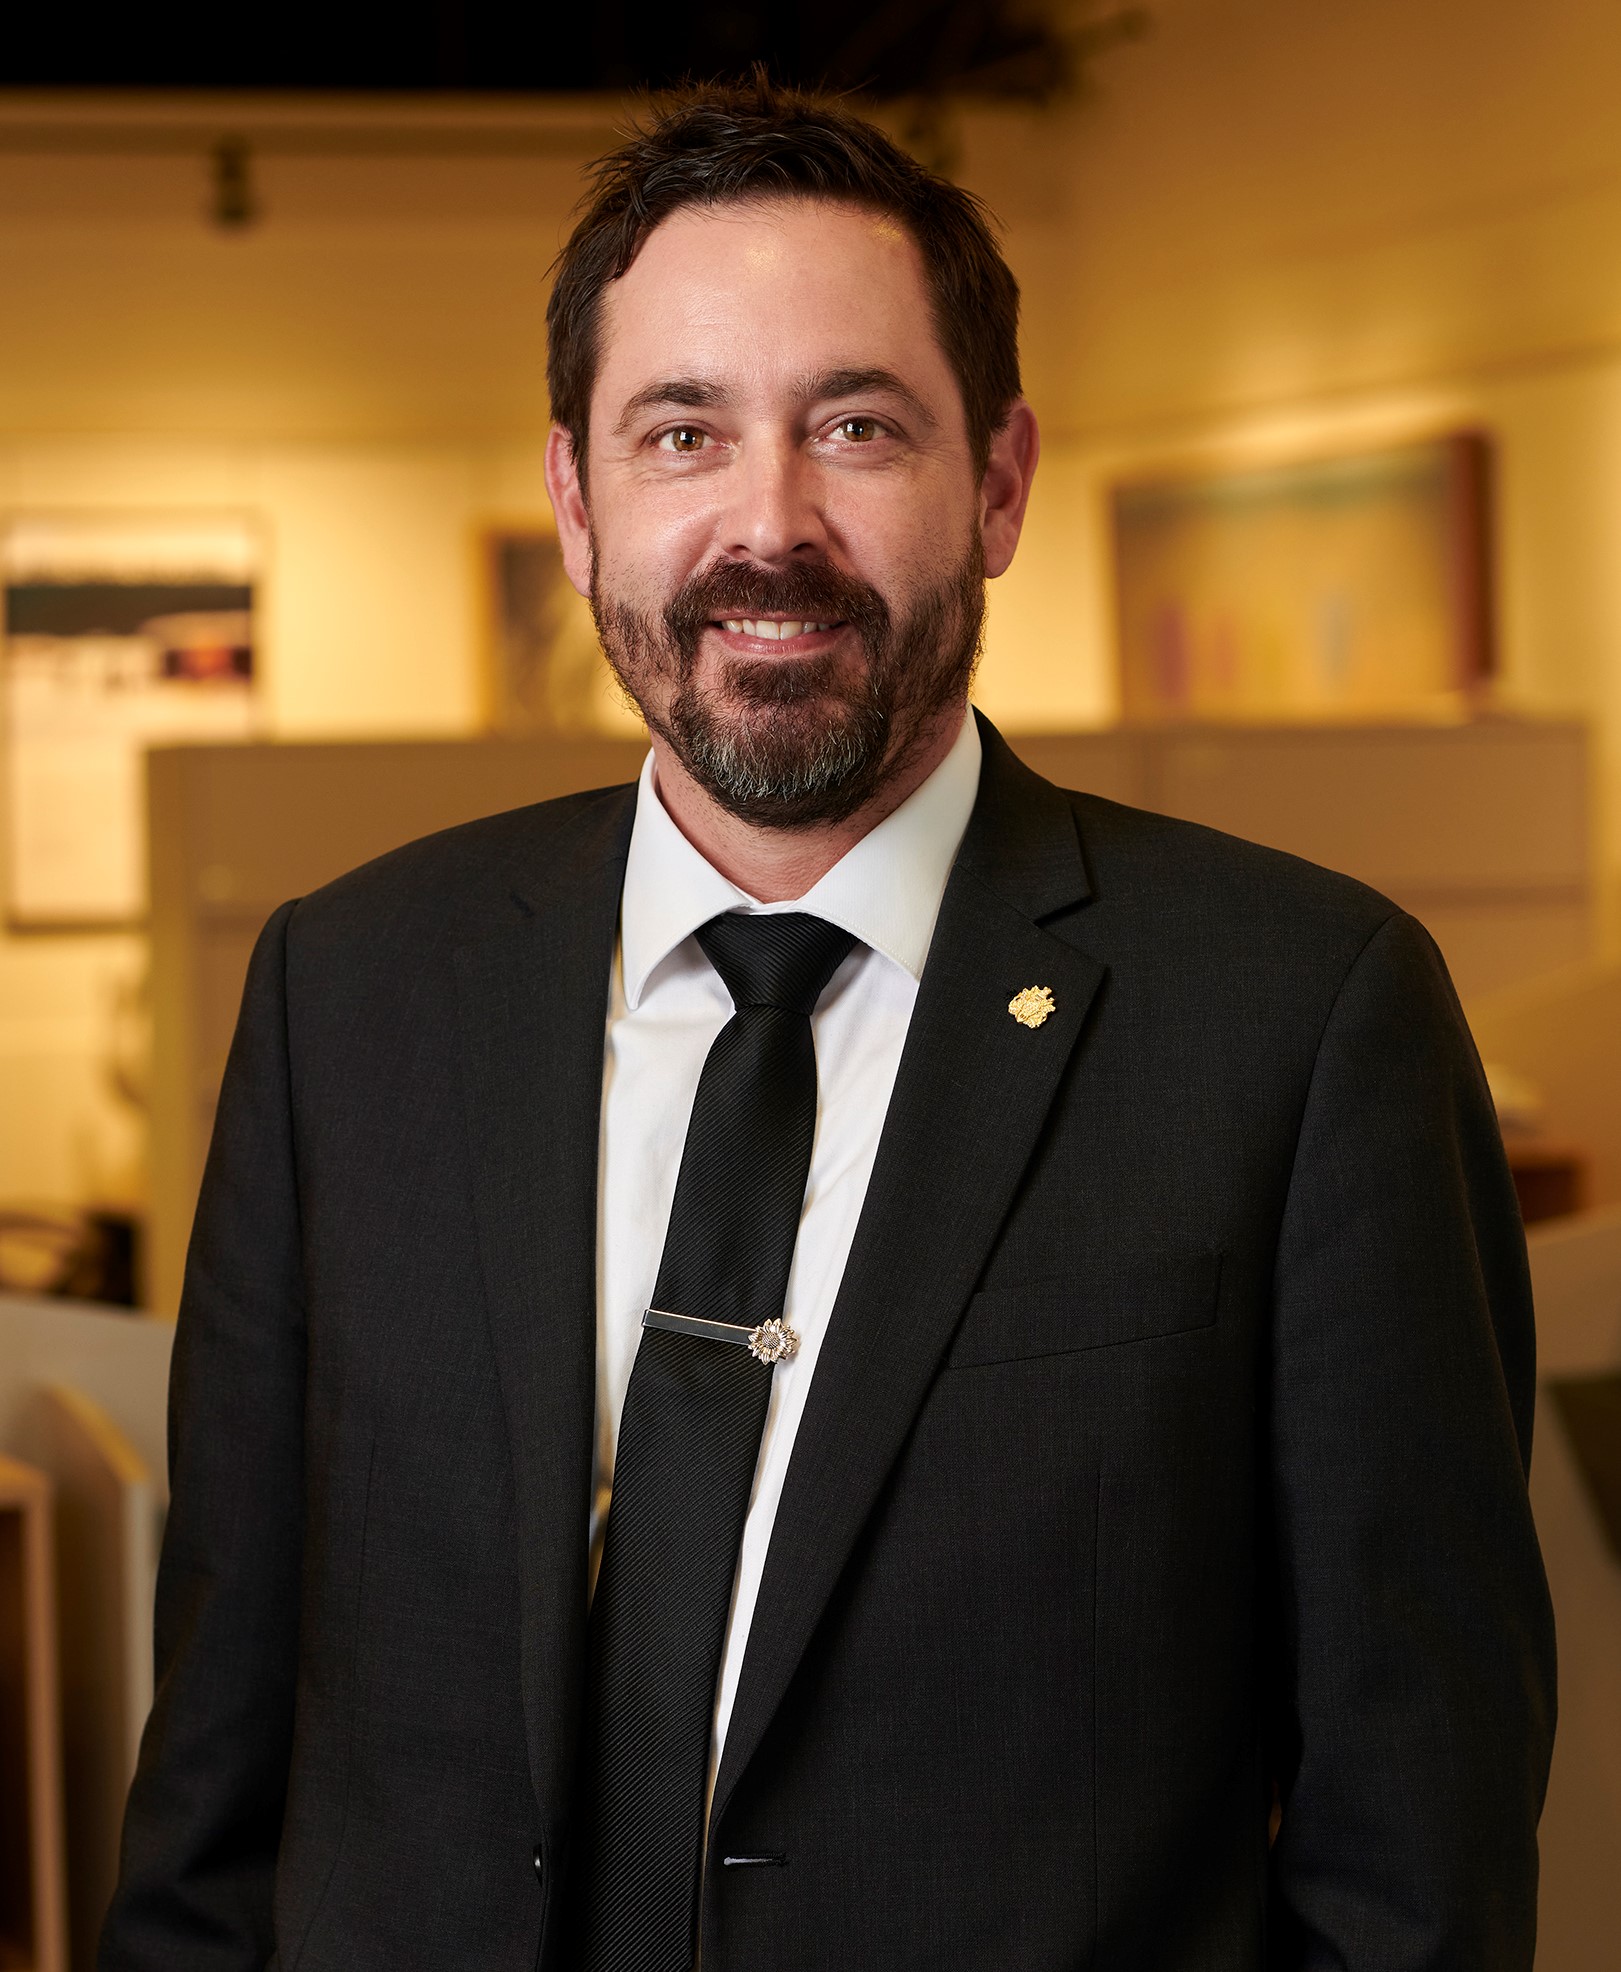 Tall, white male with brown hair and a beard wearing a black suit. He is standing in an office with a blurred background smiling.